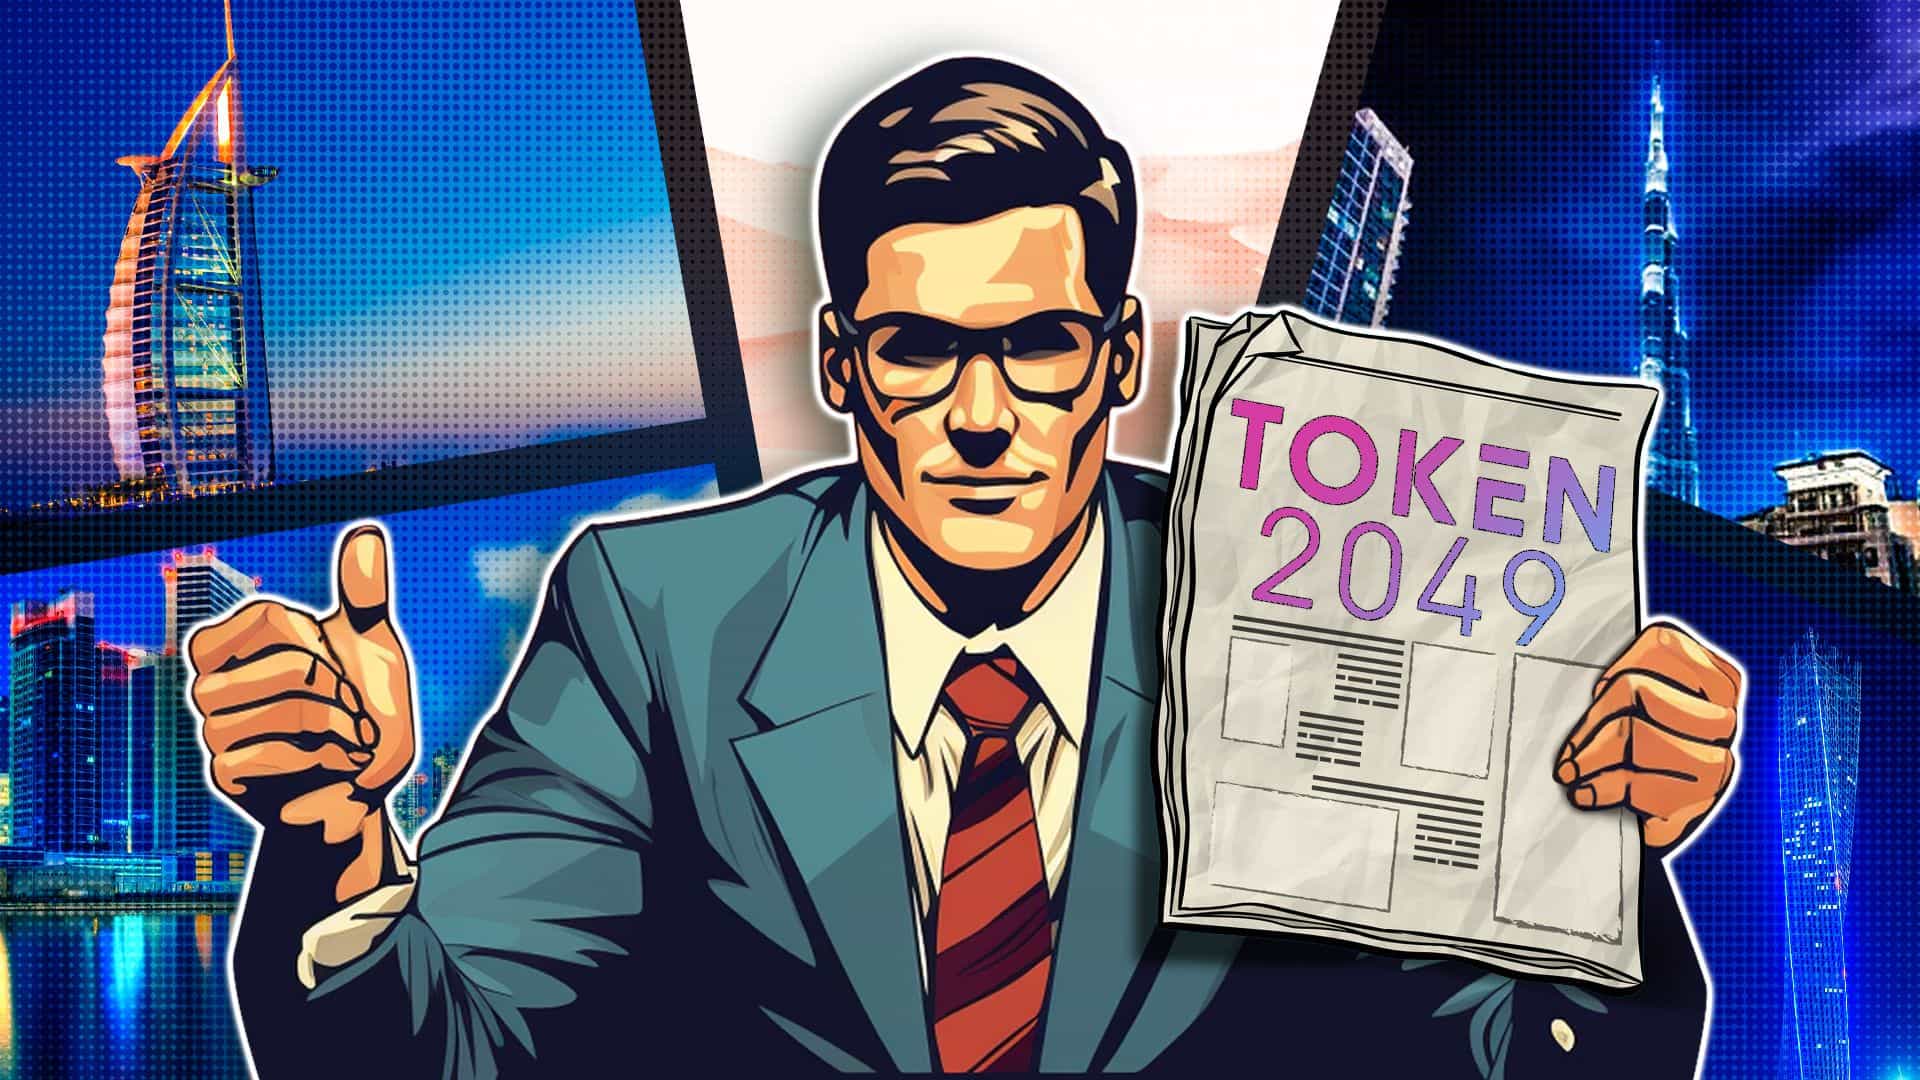 First Round of Speakers for TOKEN2049 Dubai Revealed